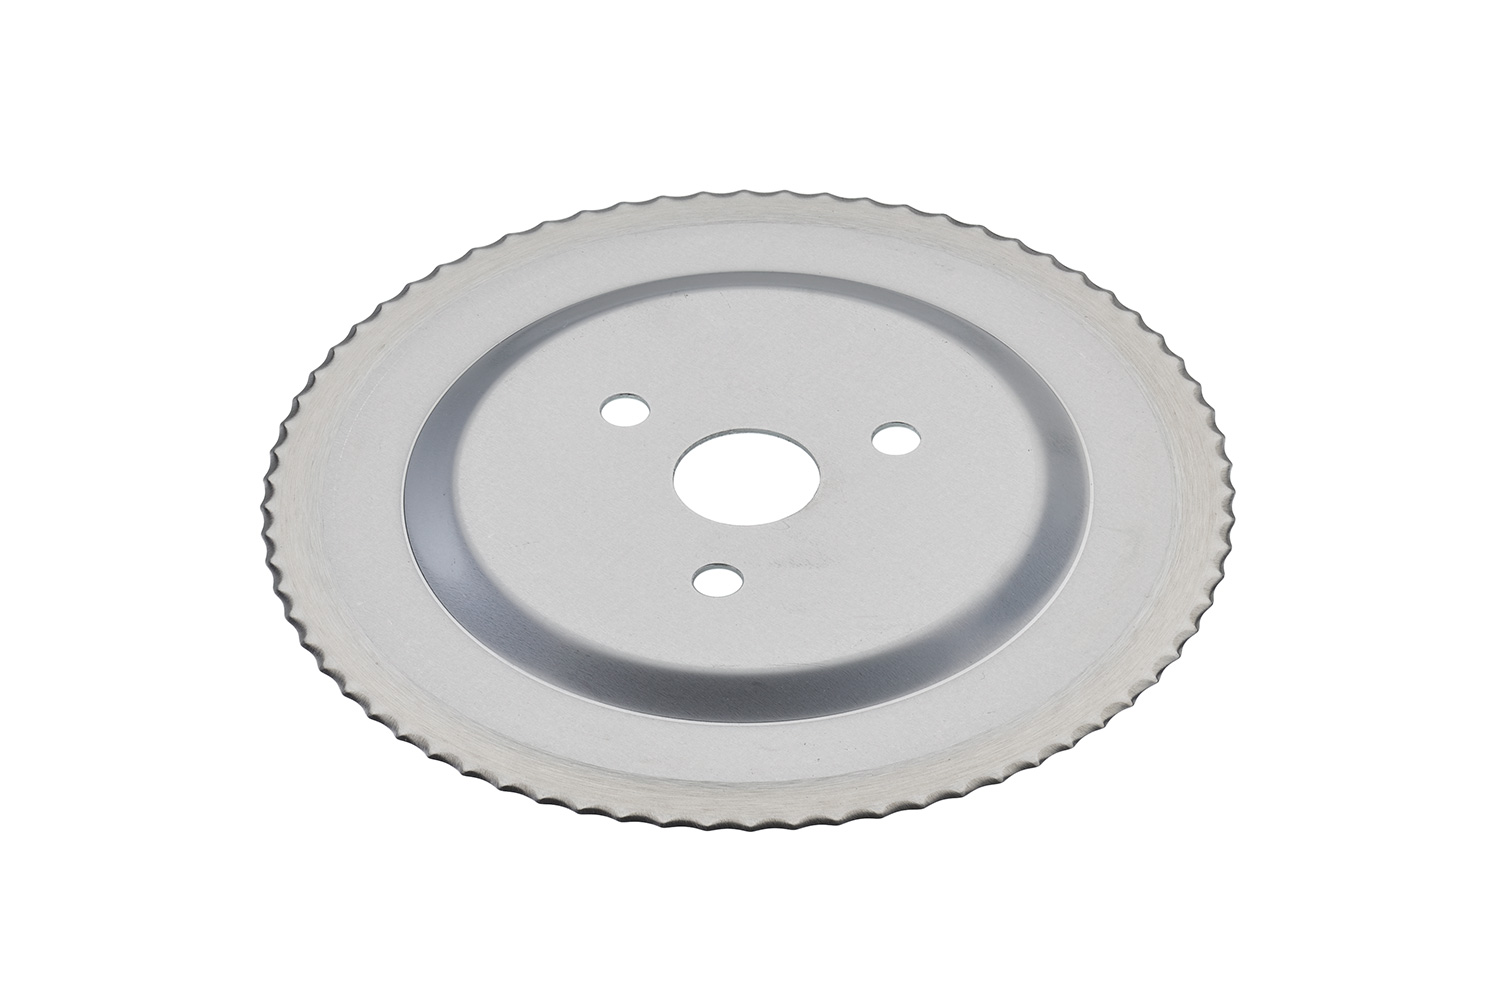 Standard serrated circular blade without a gear